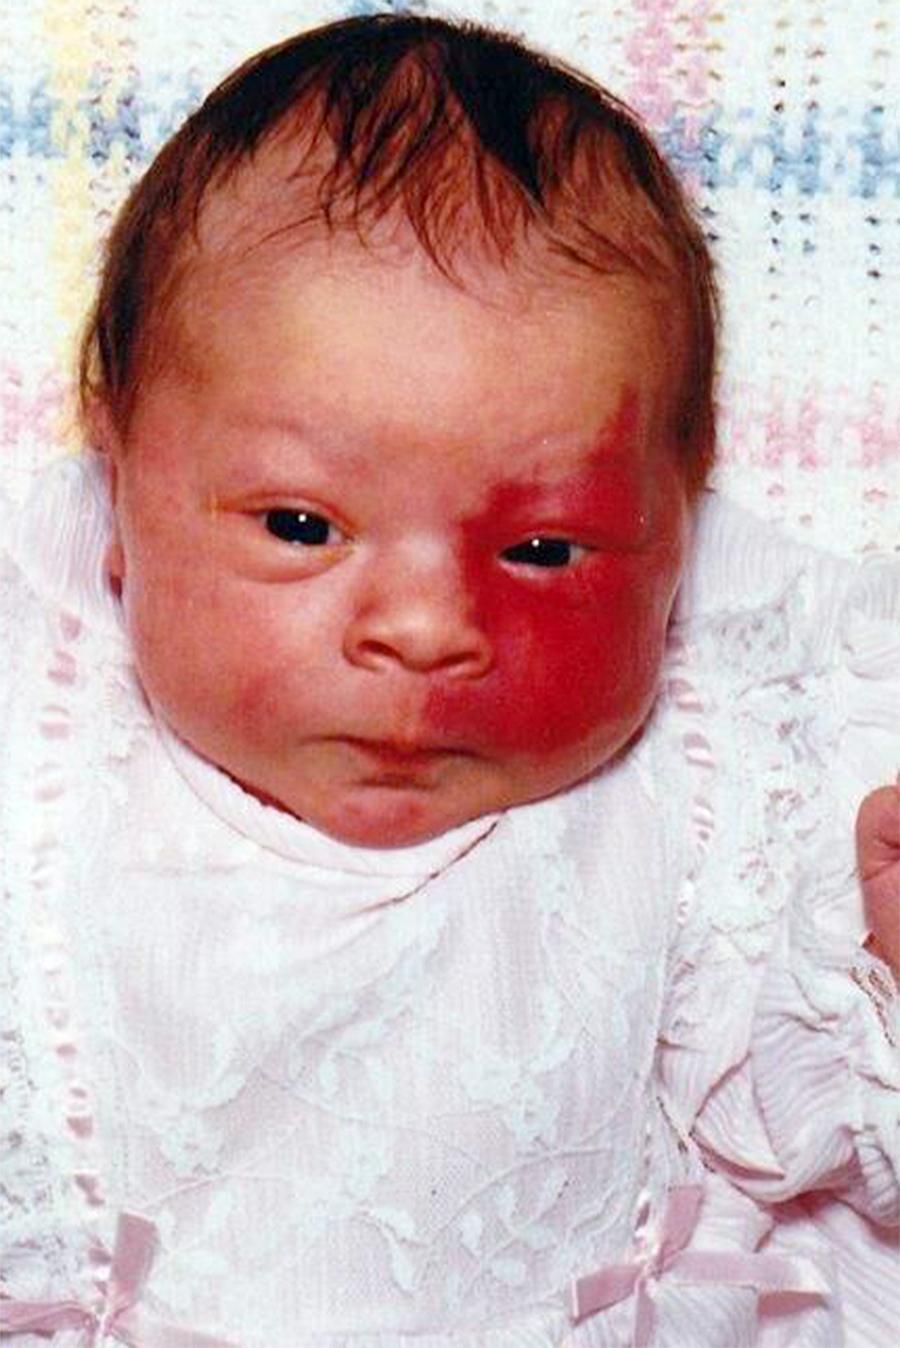 Paige's birth mark was more pronounced when she was a baby.